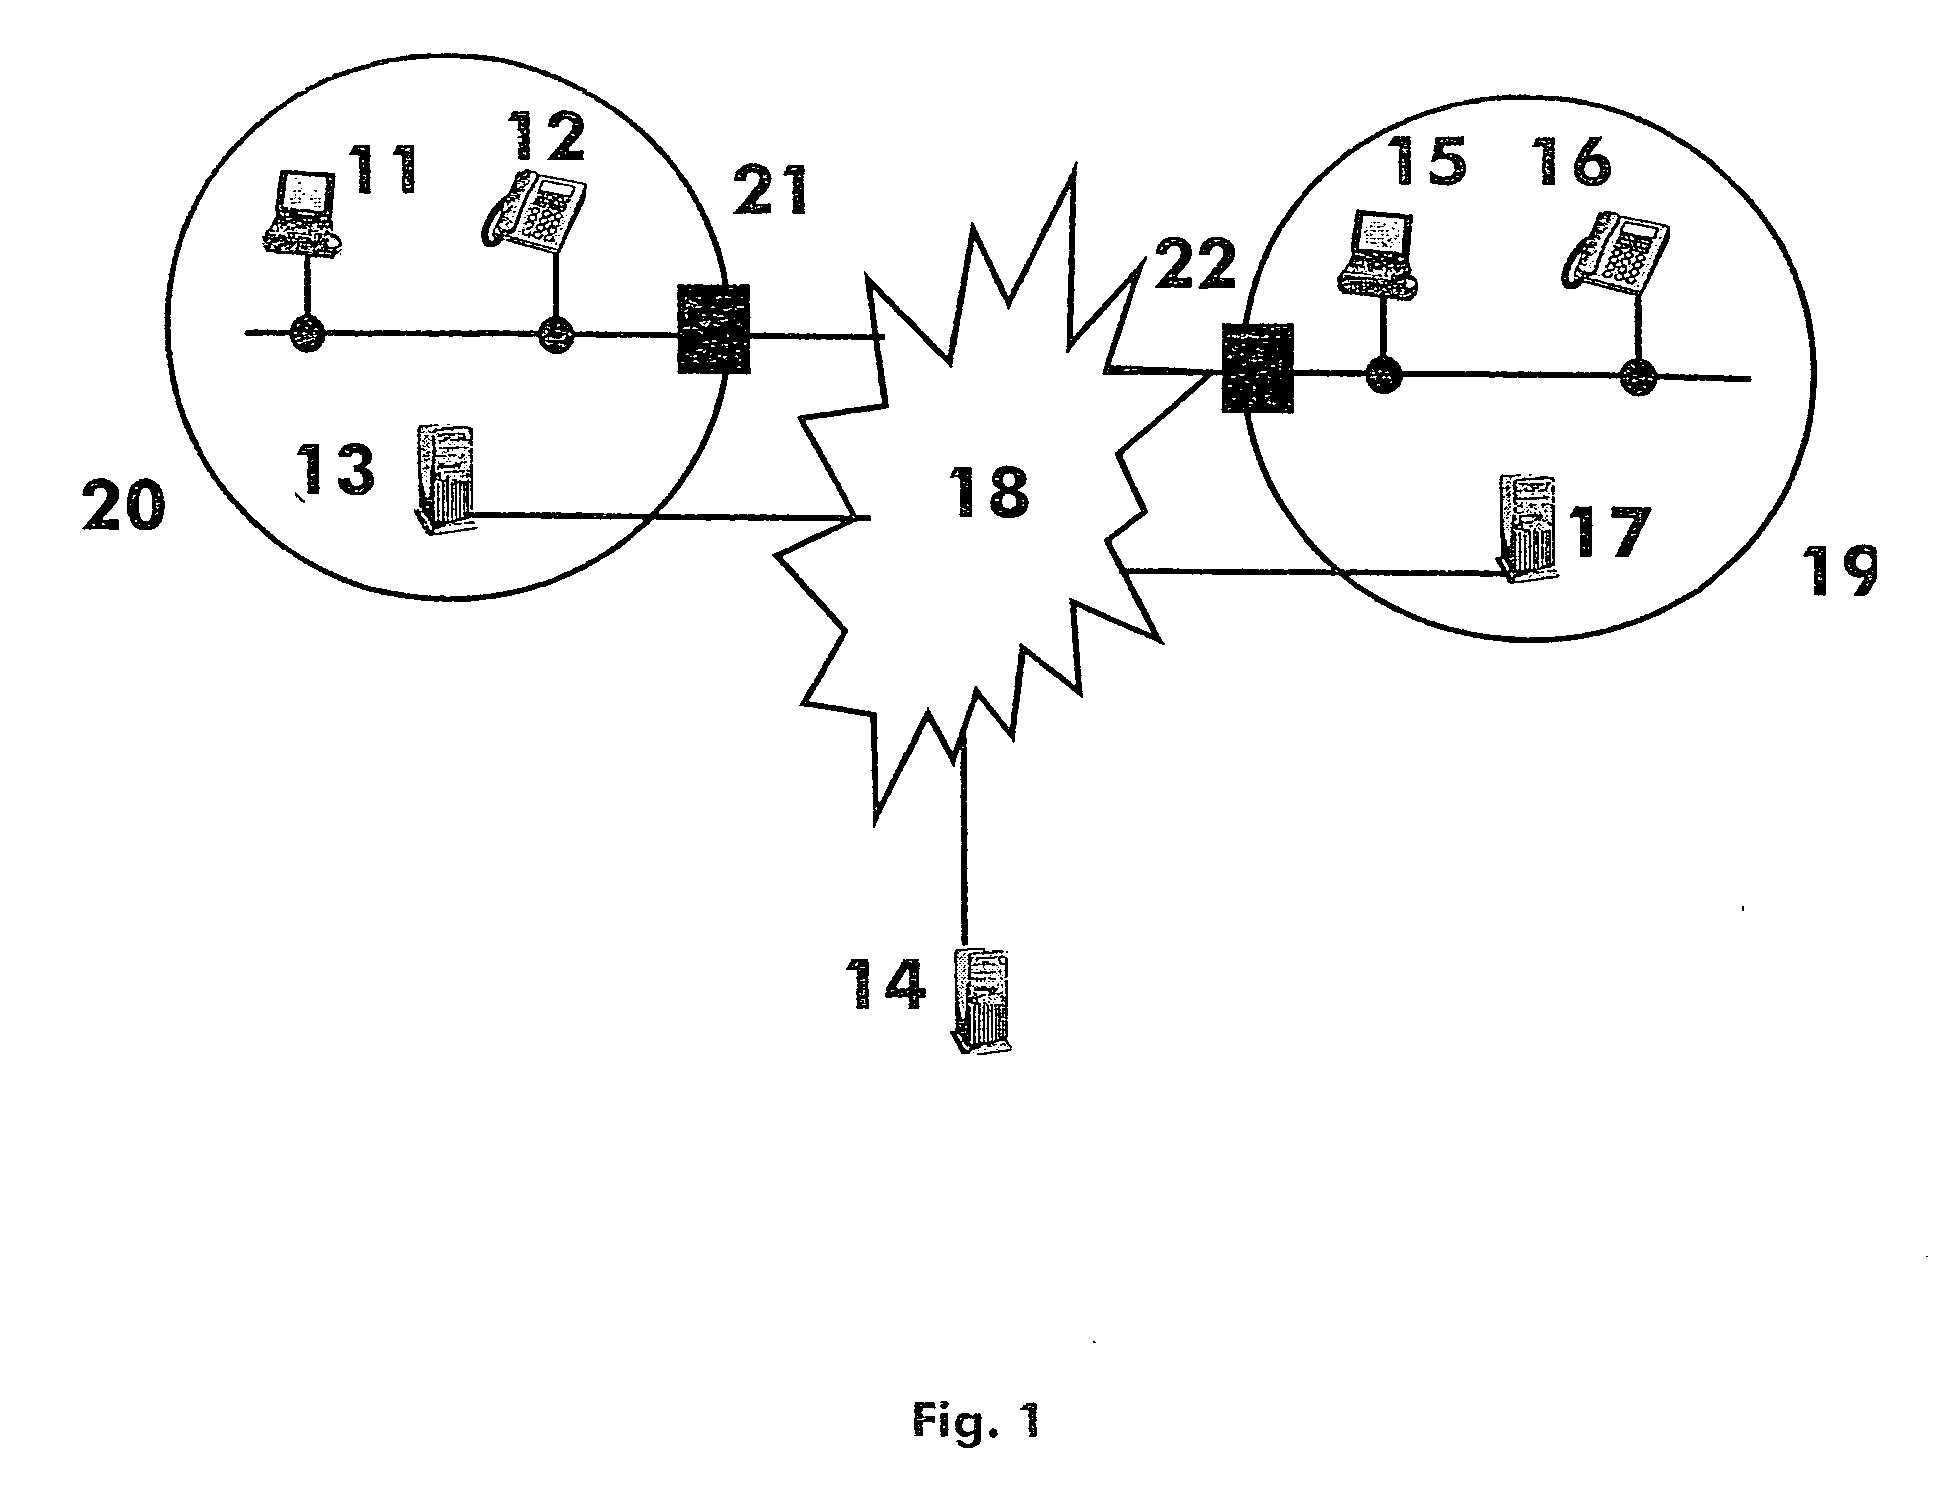 Method for allocating a non-data device to a voice vlan object of the invention